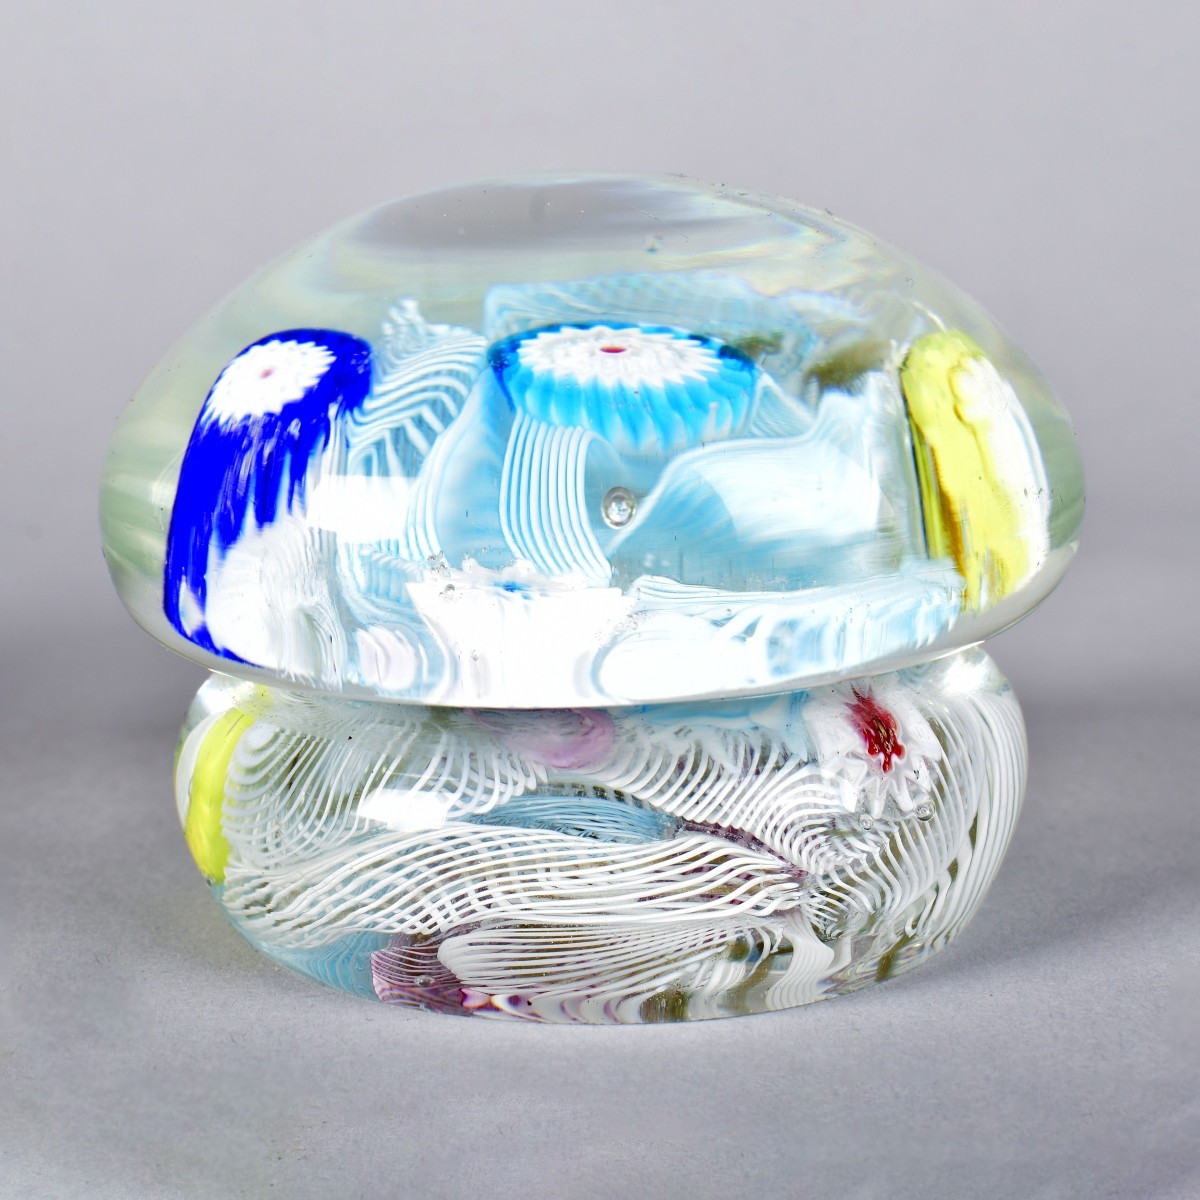 Four Vintage Art Glass Paperweights